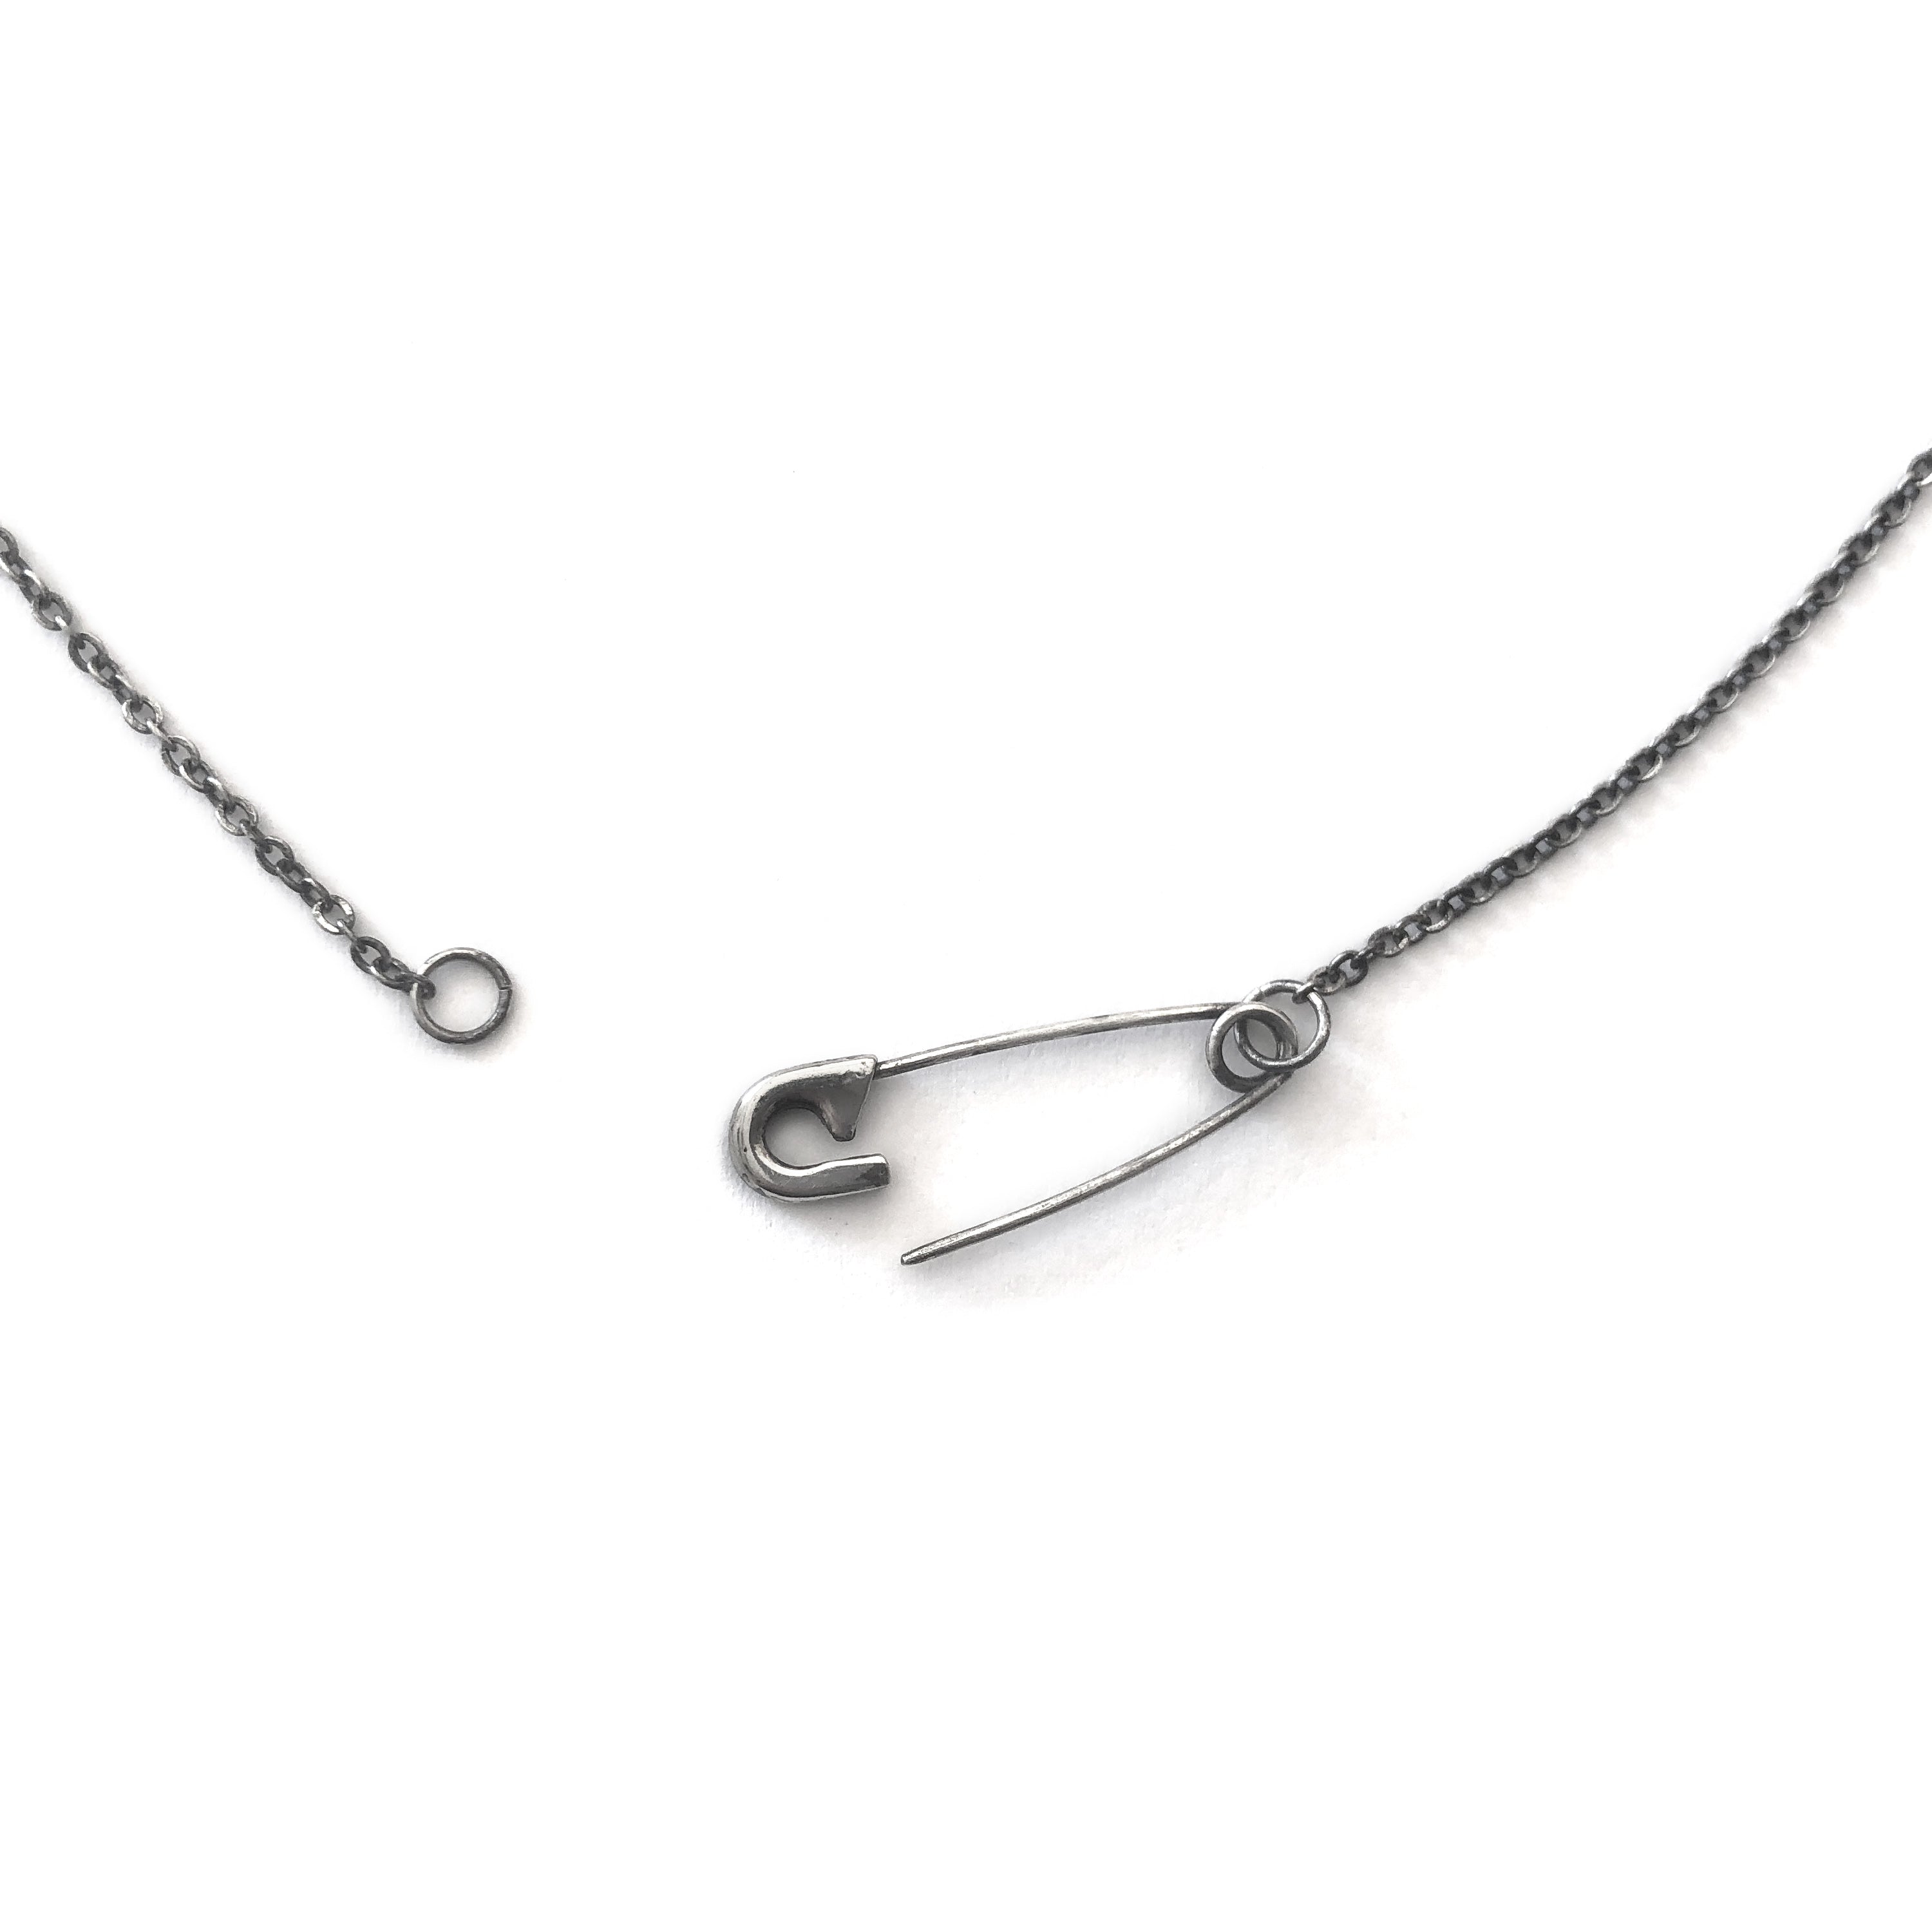 Safety Pin Necklace - Sterling Silver